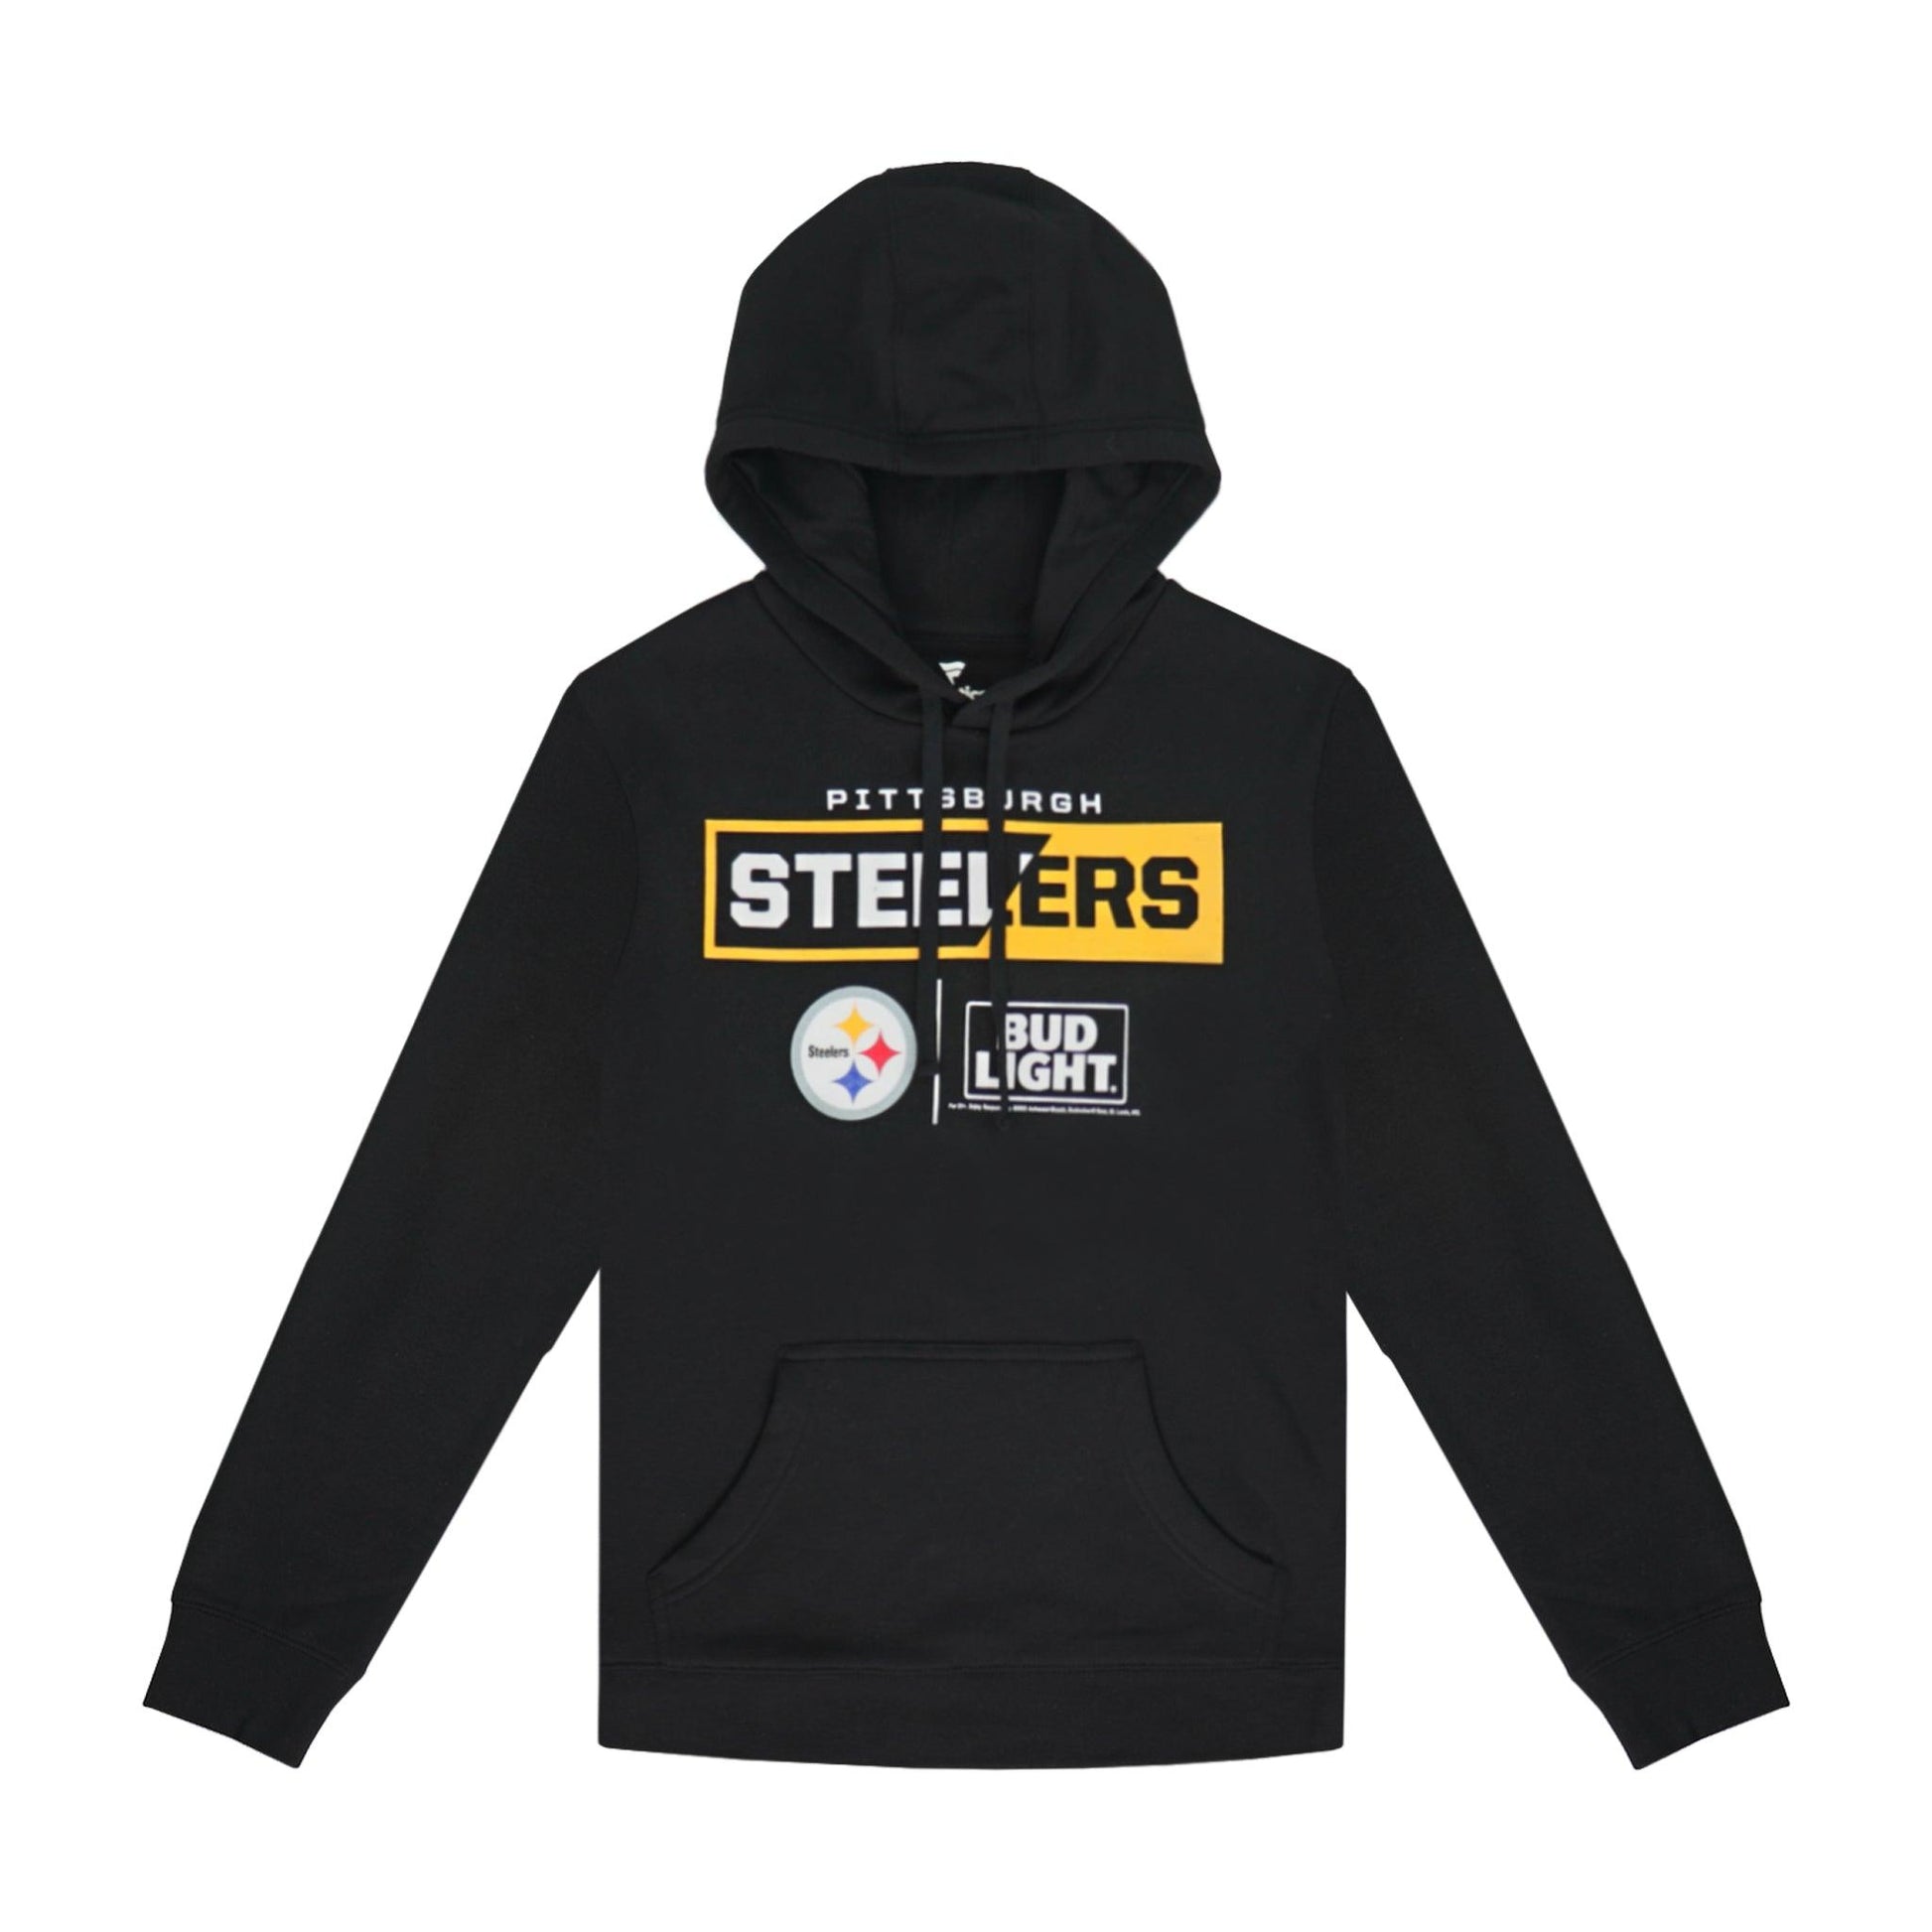 Steelers and bud light logos on black hoodie front